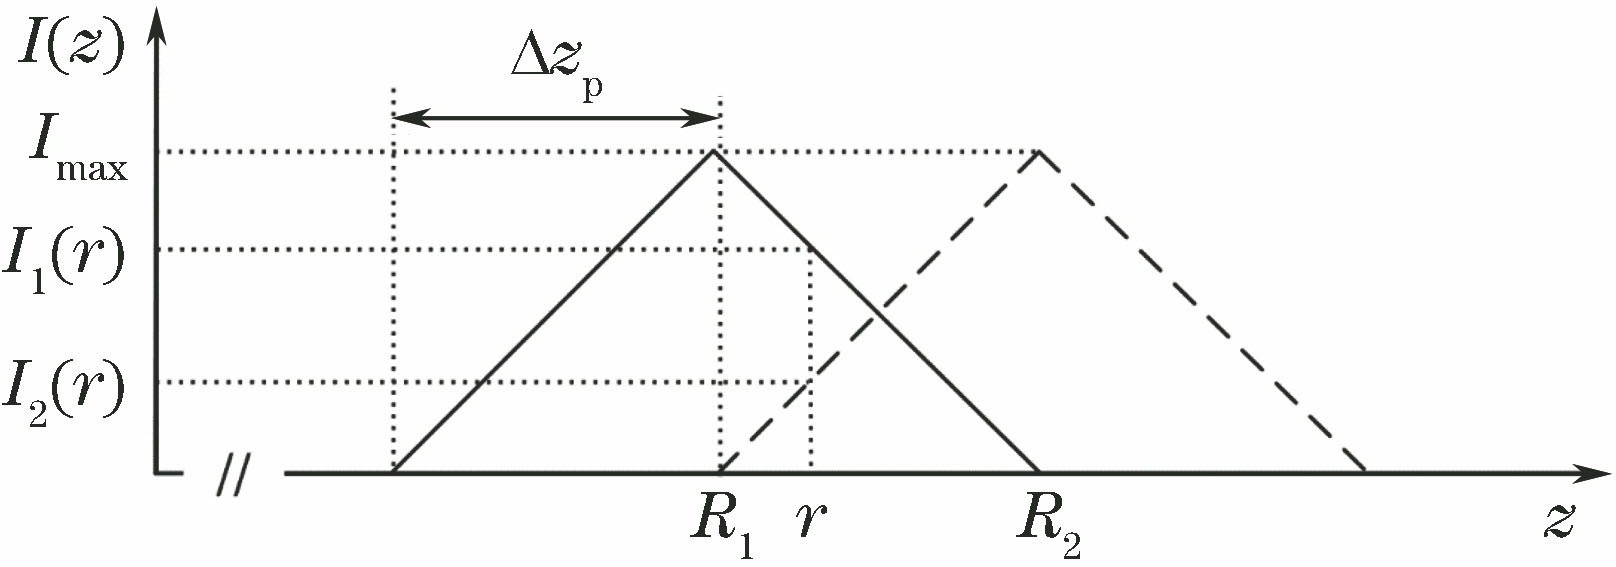 Spatial correlation function of triangular range-intensity for three-dimensional reconstruction